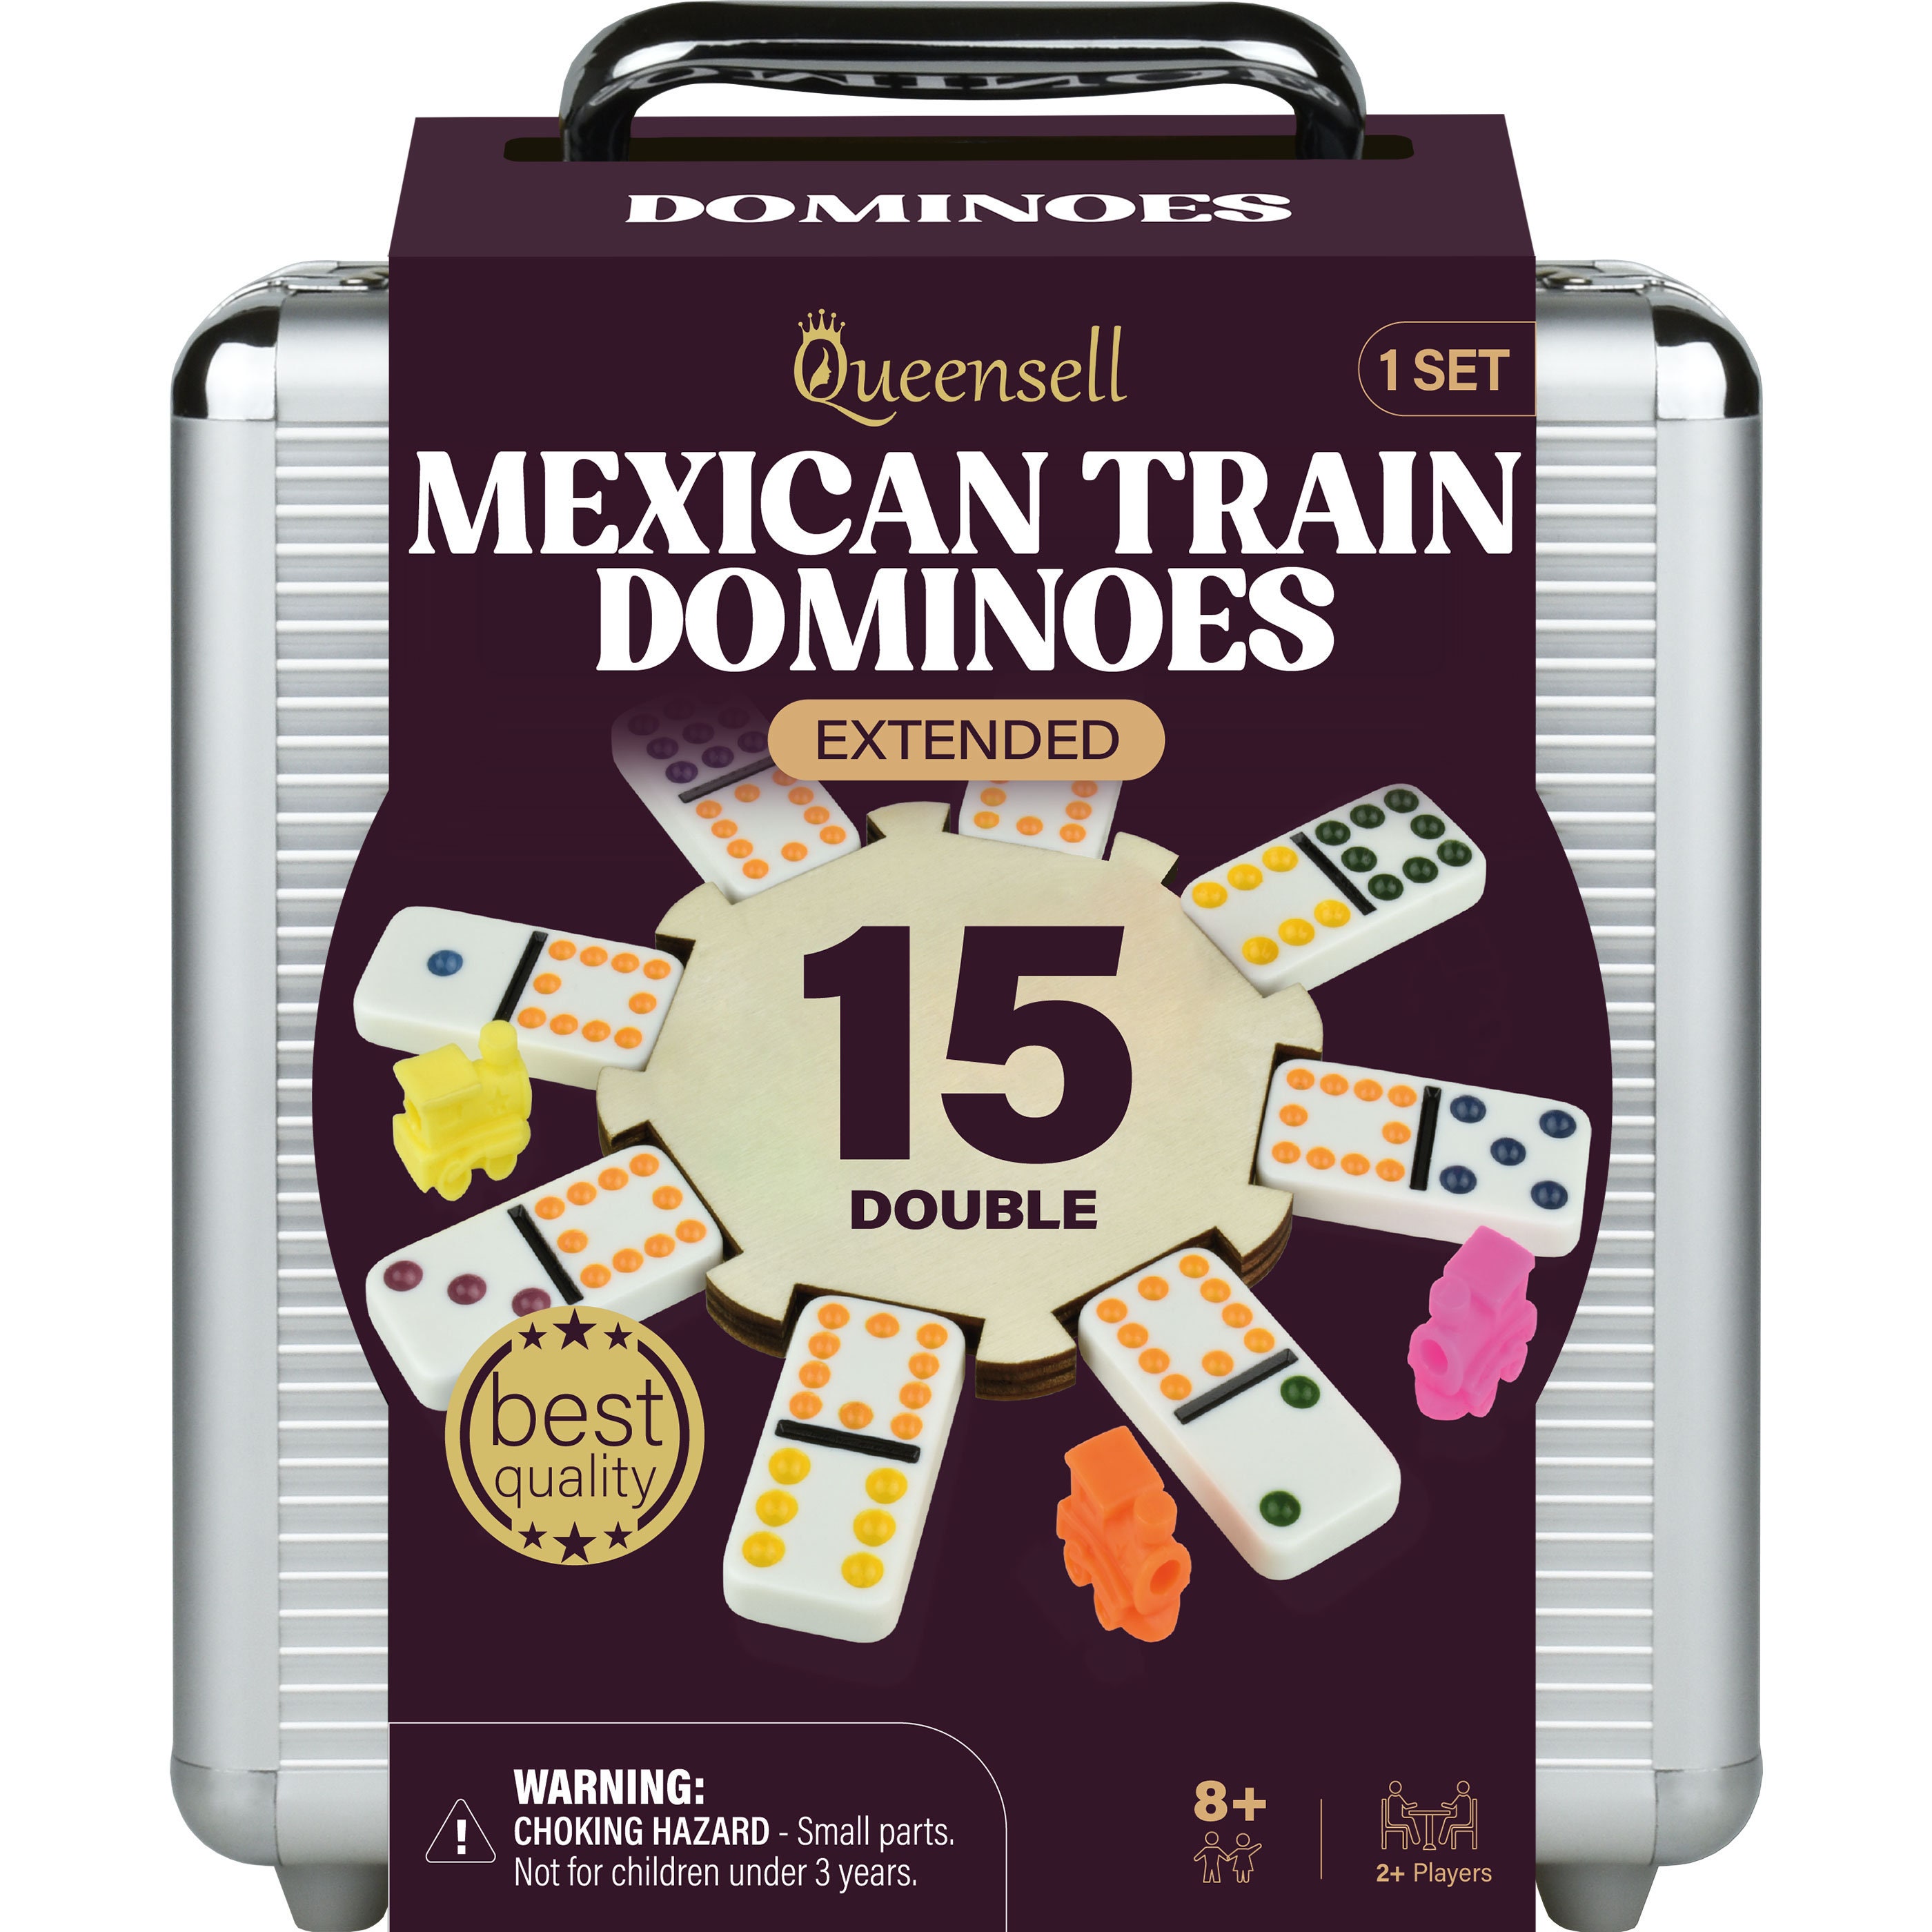 Games You Can Play with a Set of Dominoes - MexicanTrainFun